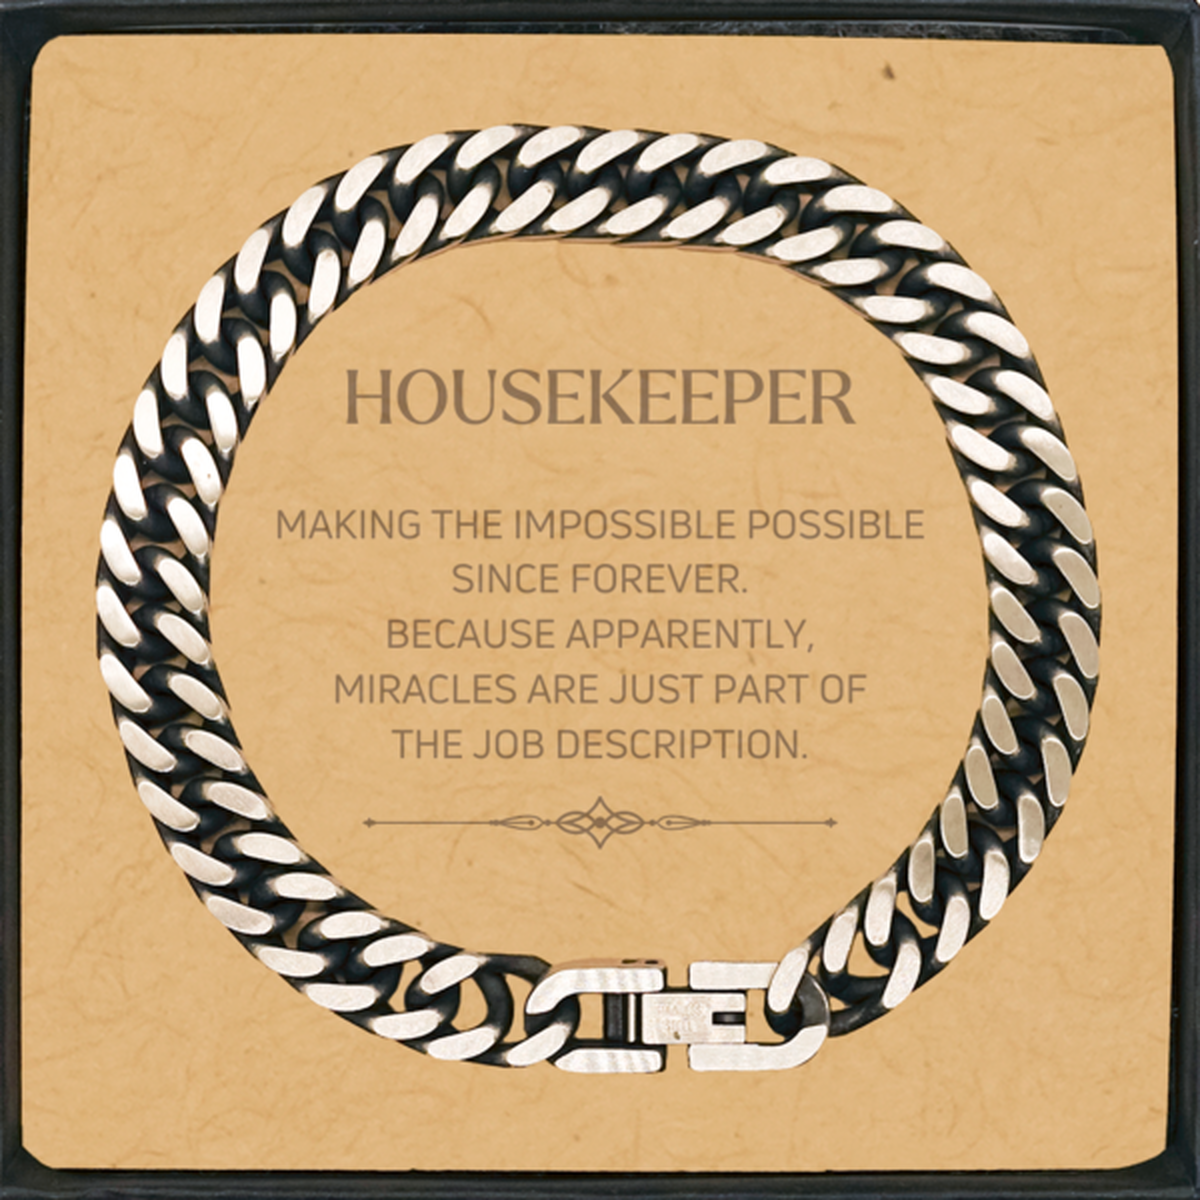 Funny Housekeeper Gifts, Miracles are just part of the job description, Inspirational Birthday Cuban Link Chain Bracelet For Housekeeper, Men, Women, Coworkers, Friends, Boss